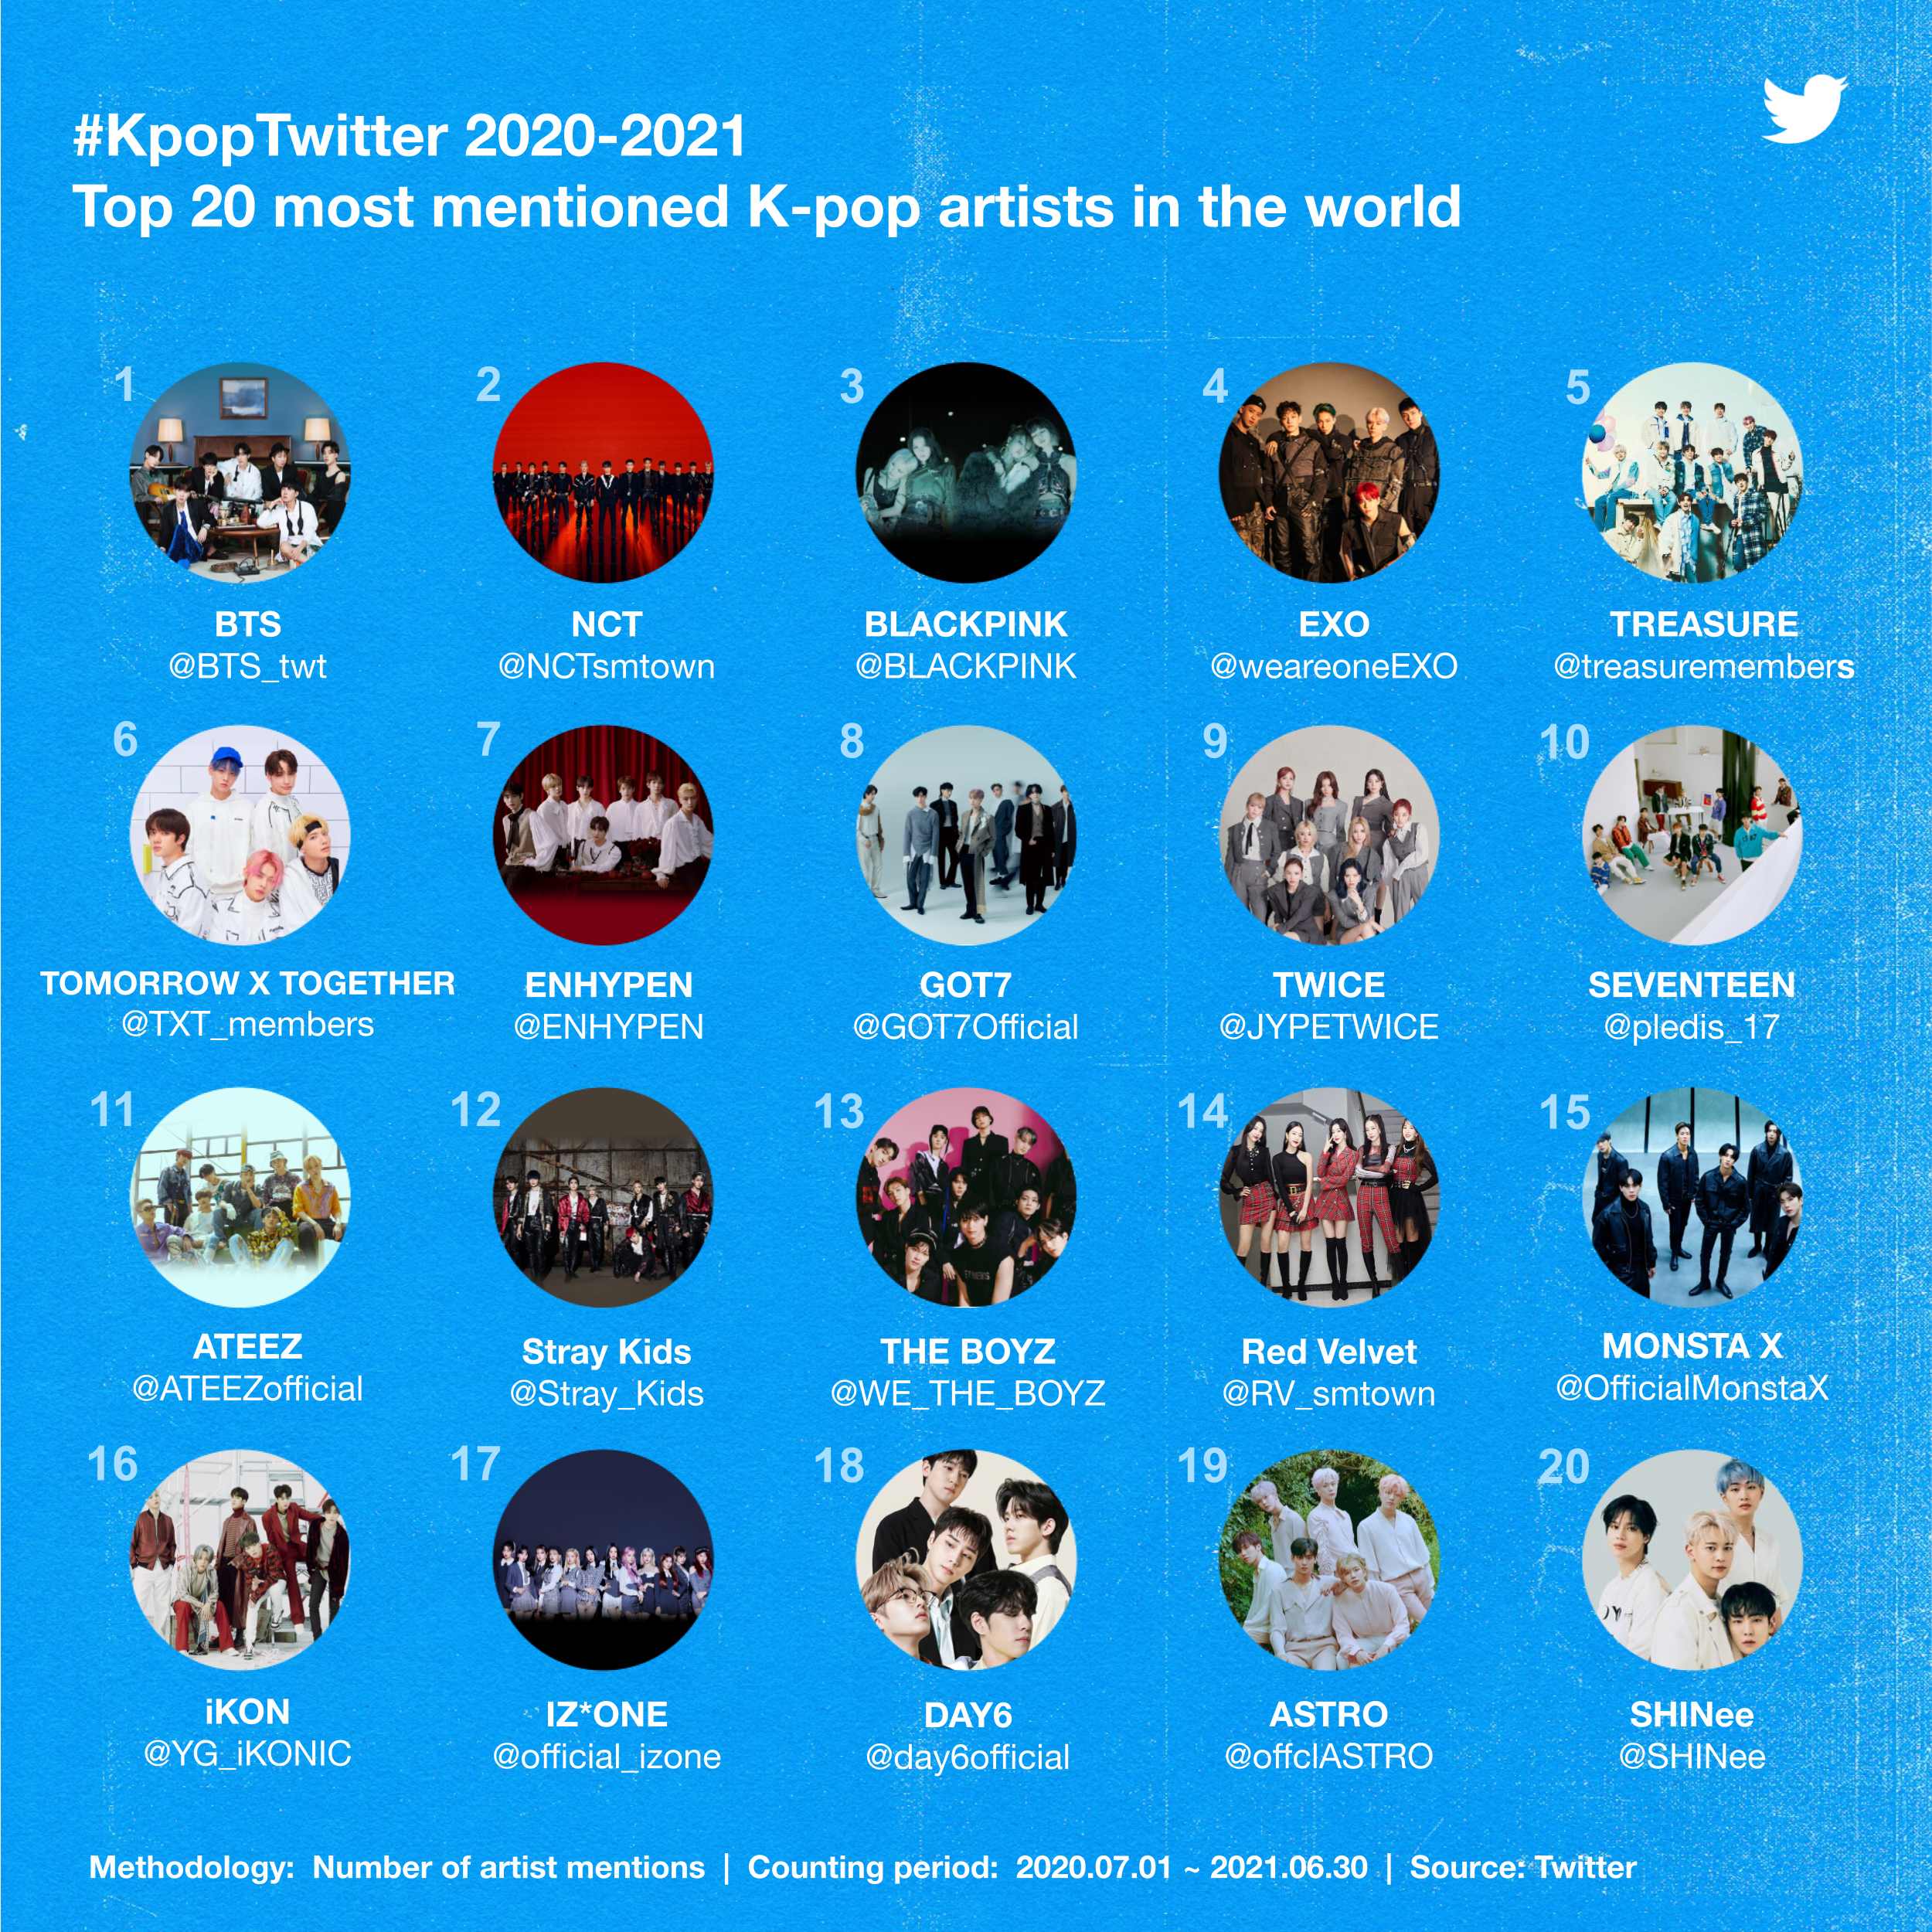 KpopTwitter-July-2021-Top-20-most-mentioned-K-pop-artists-in-the-world.jpg